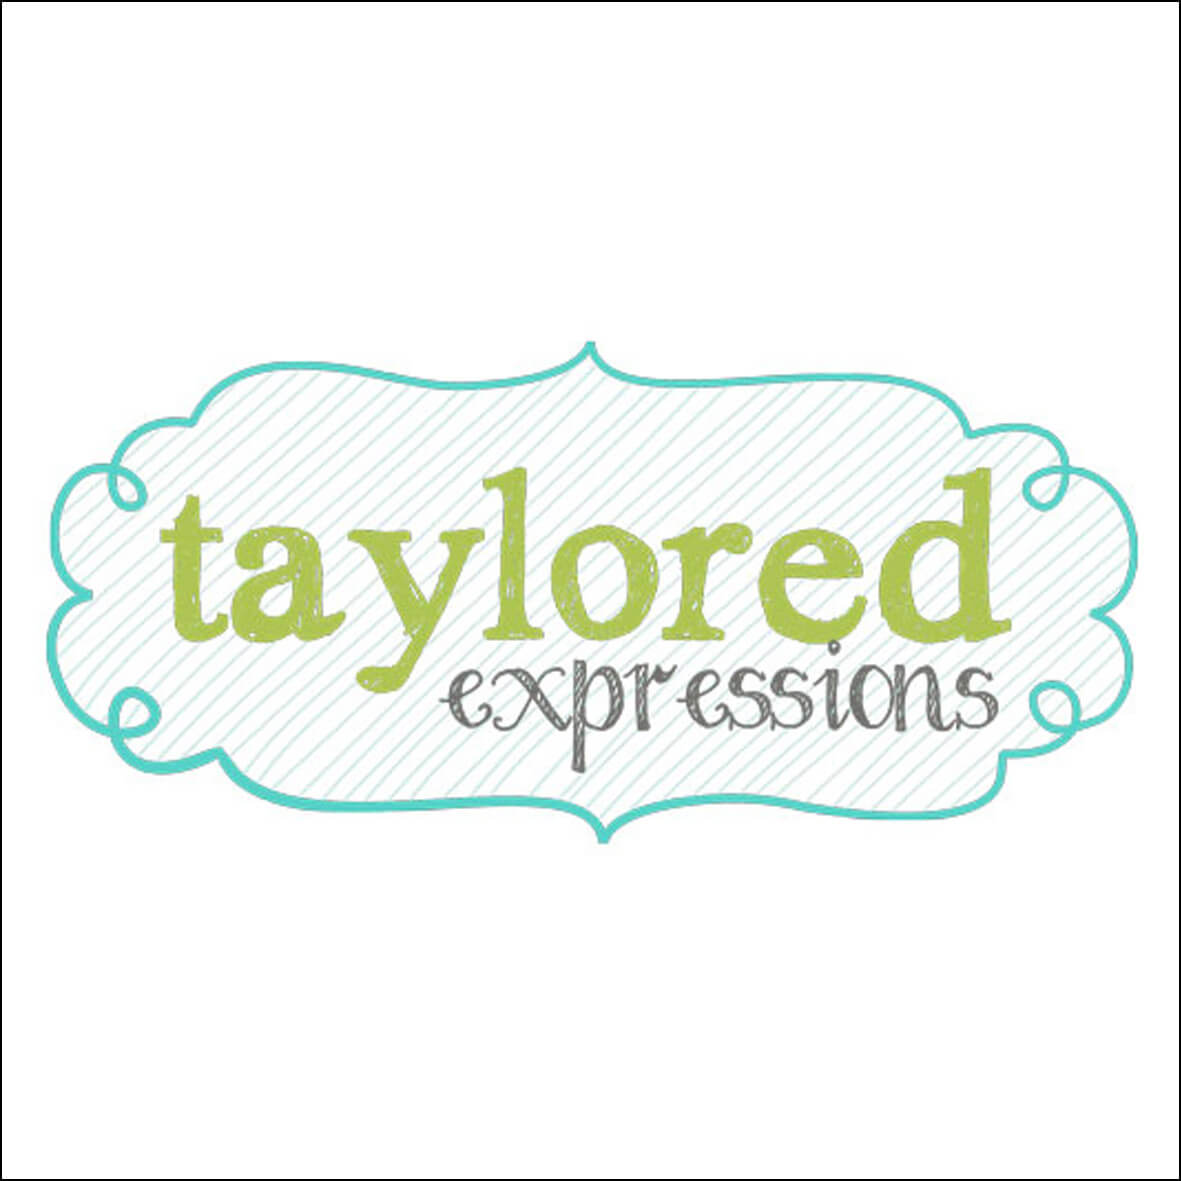 Taylored Expressions